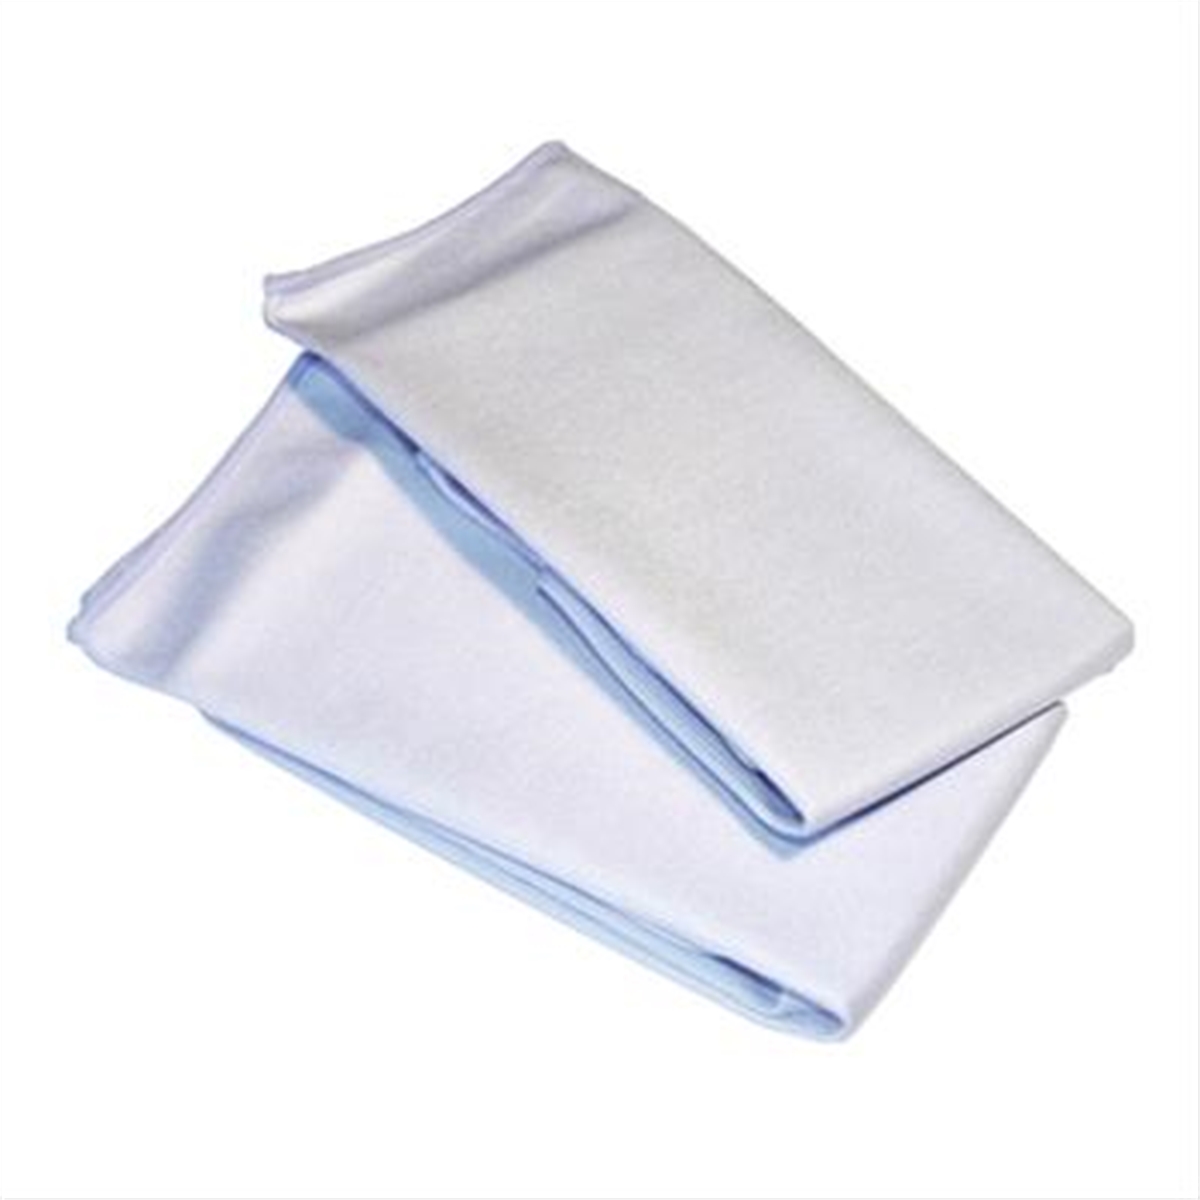 Picture of GlassMaster KTD72502 Pro Micro Fiber Cloths - Pack of 2